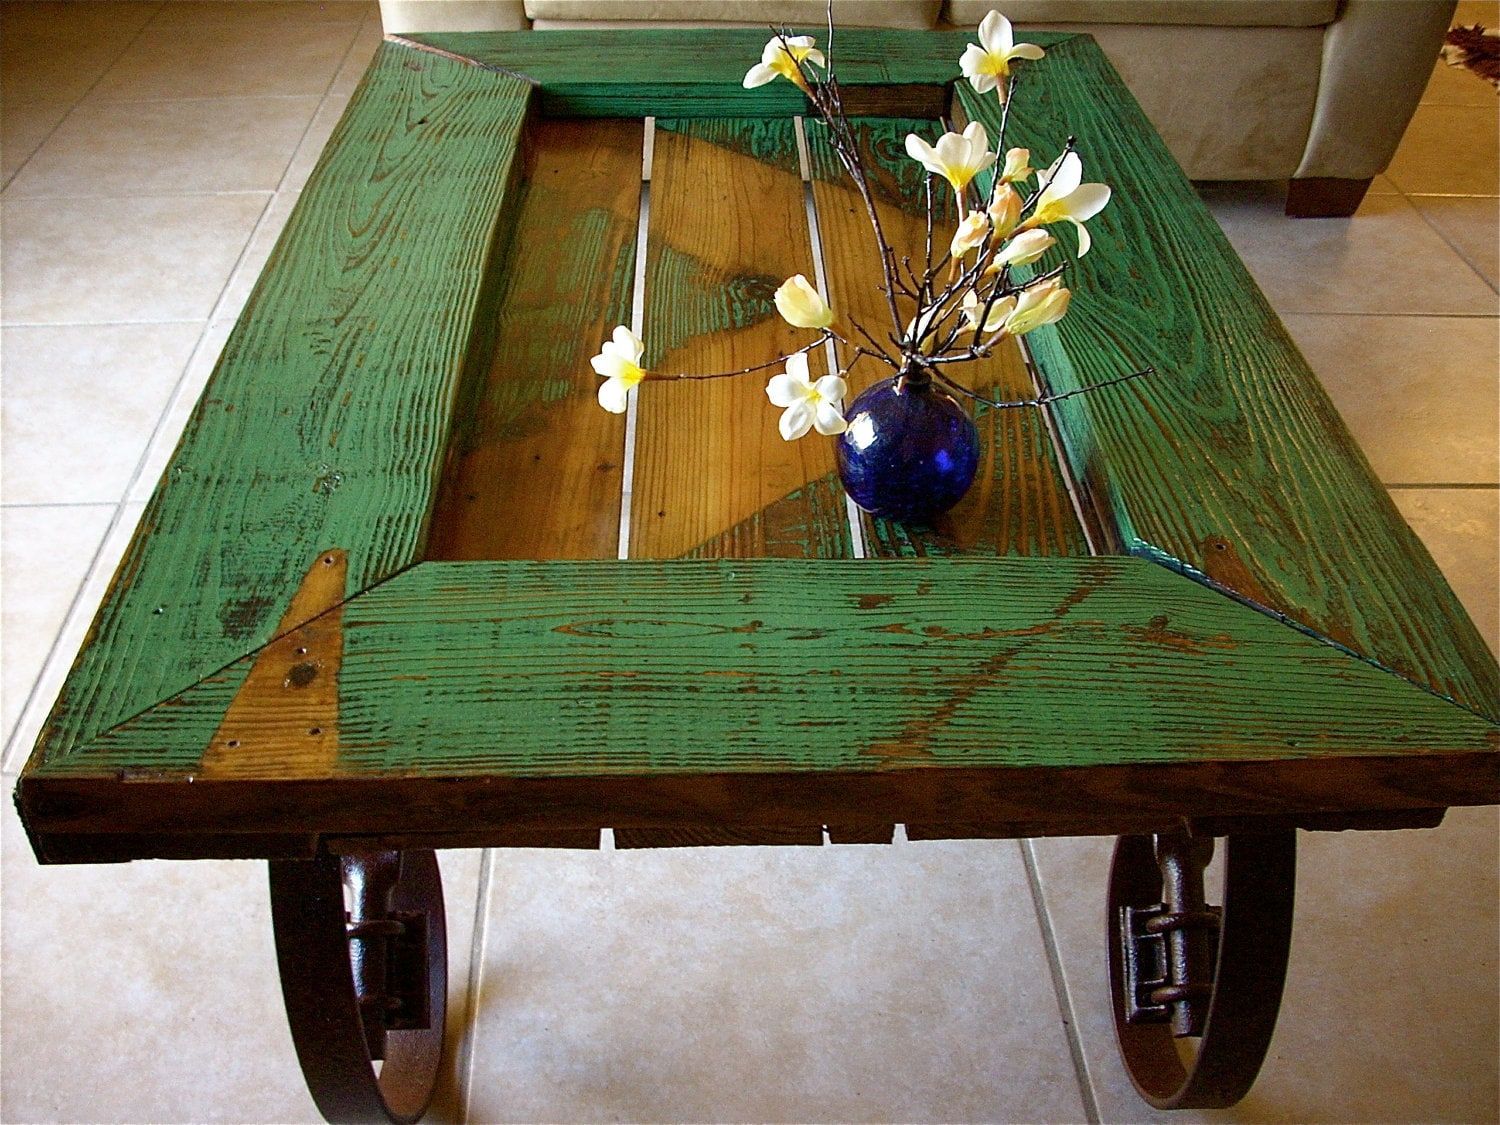 Barn Door Coffee Table Throughout Coffee Tables With Sliding Barn Doors (Gallery 13 of 20)